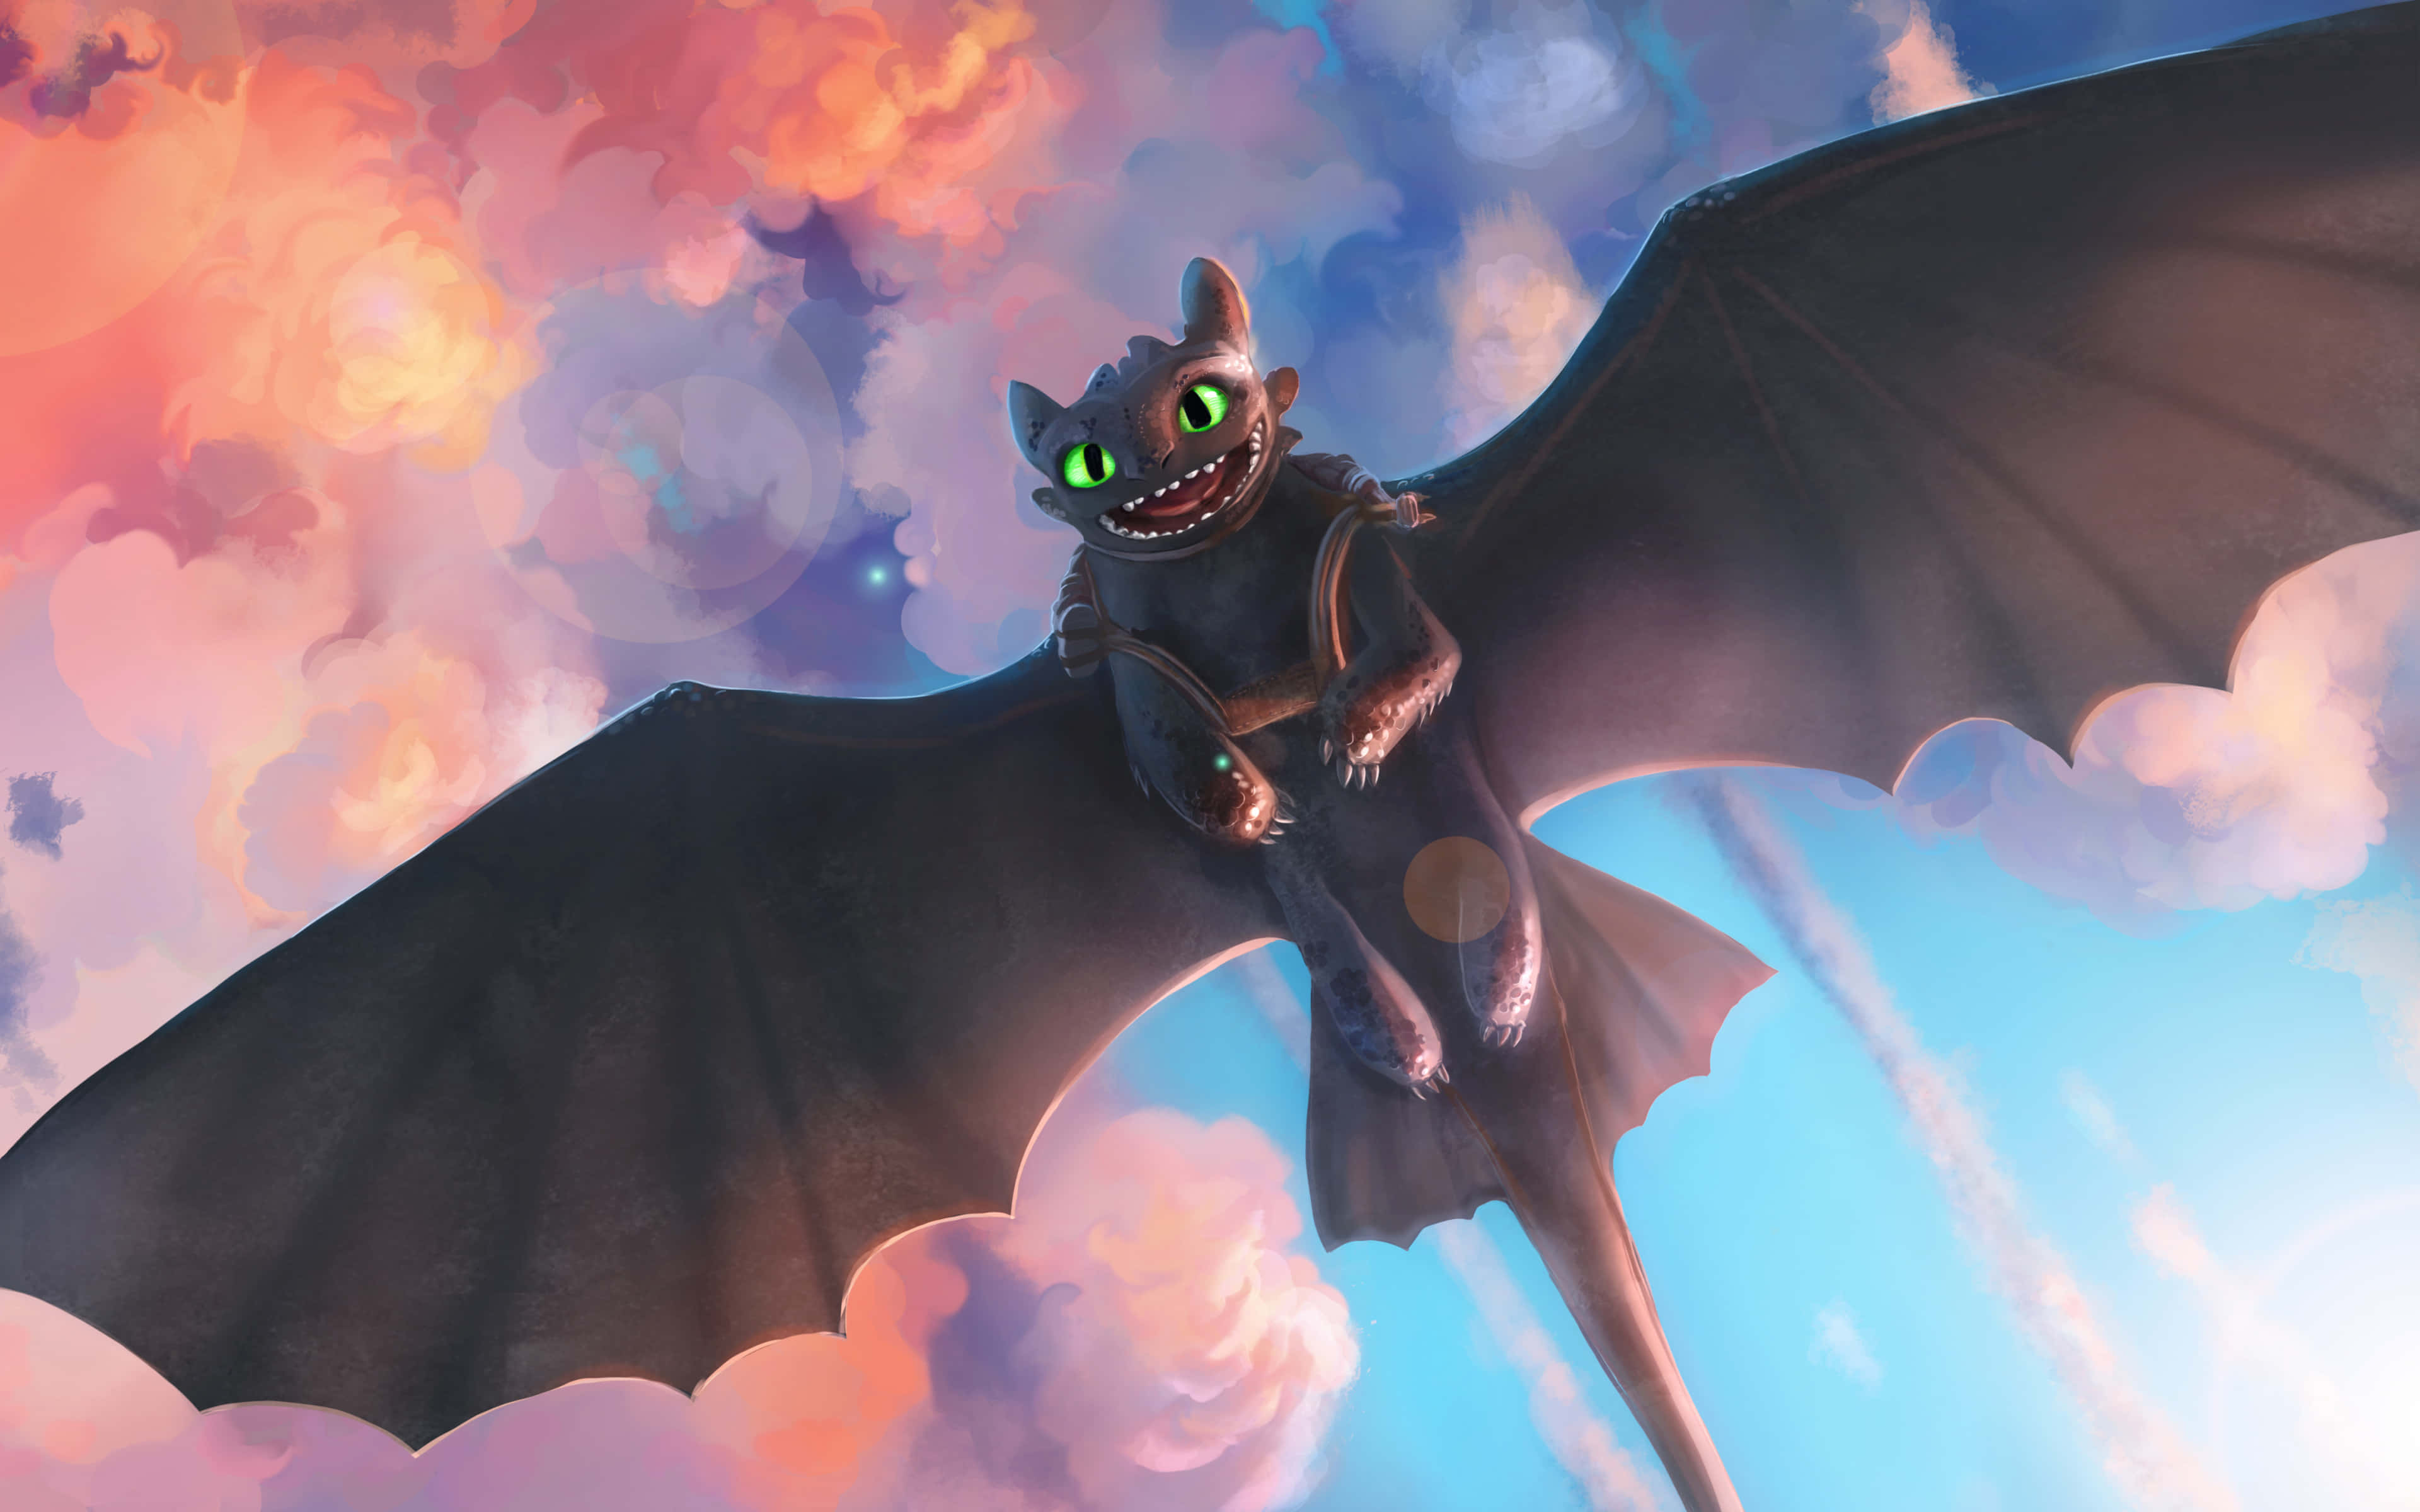 Fly To New Adventures With How To Train Your Dragon Wallpaper